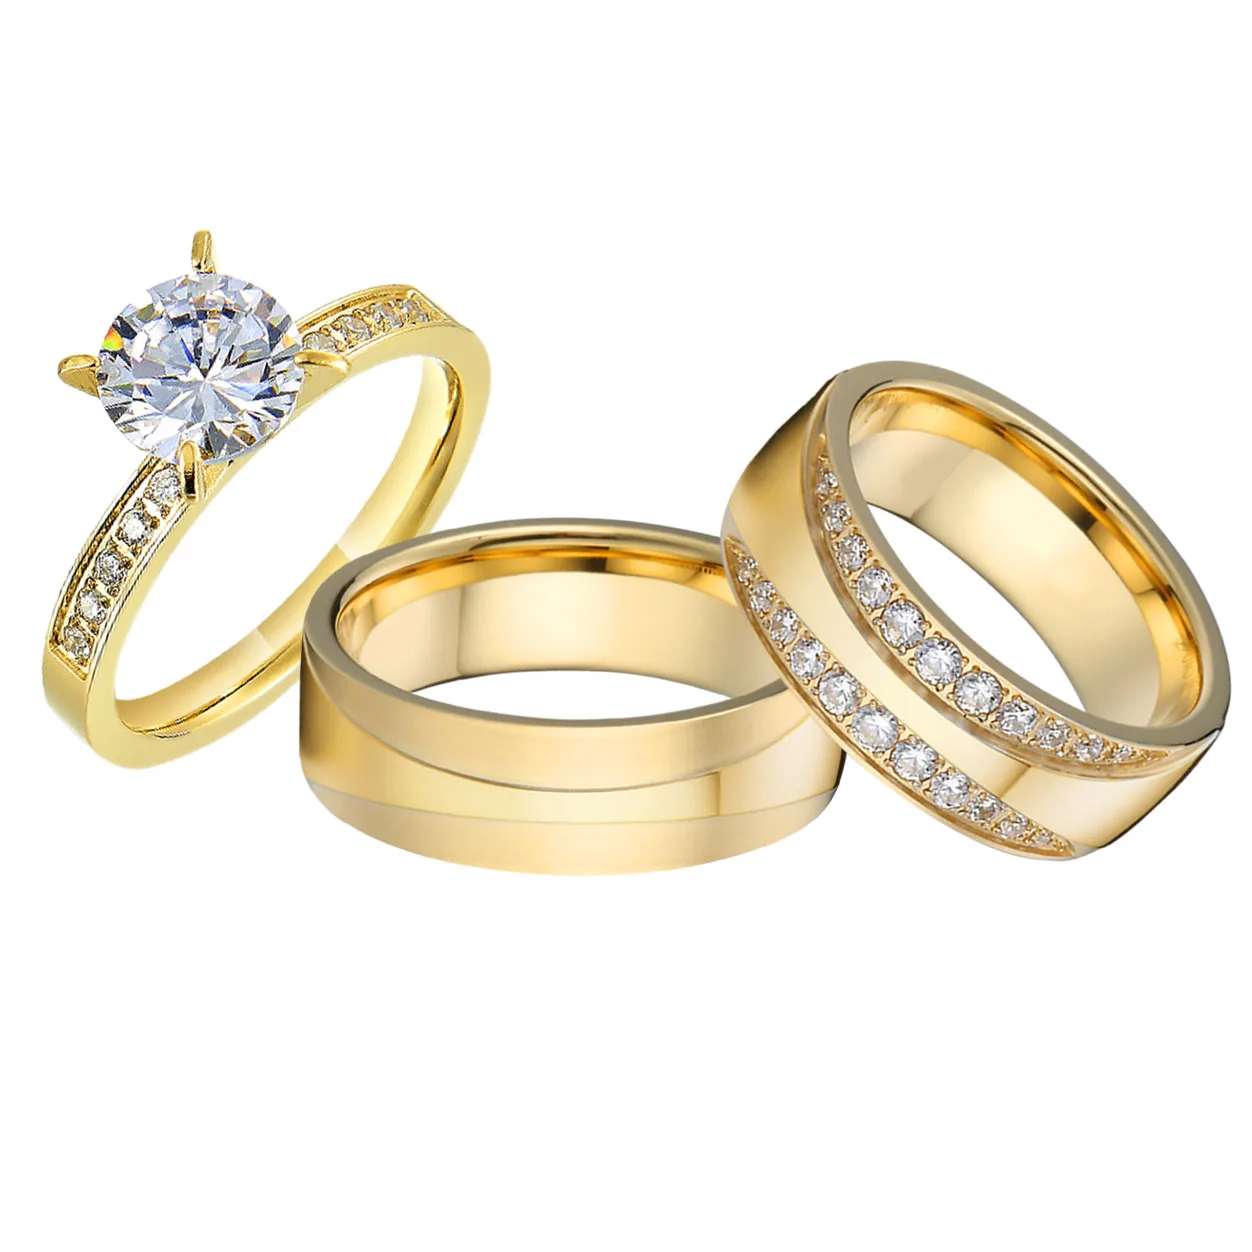 

3pcs lover's Alliance 18k gold plated marriage wedding rings jewelry women cz diamond promise engagement rings set for couples